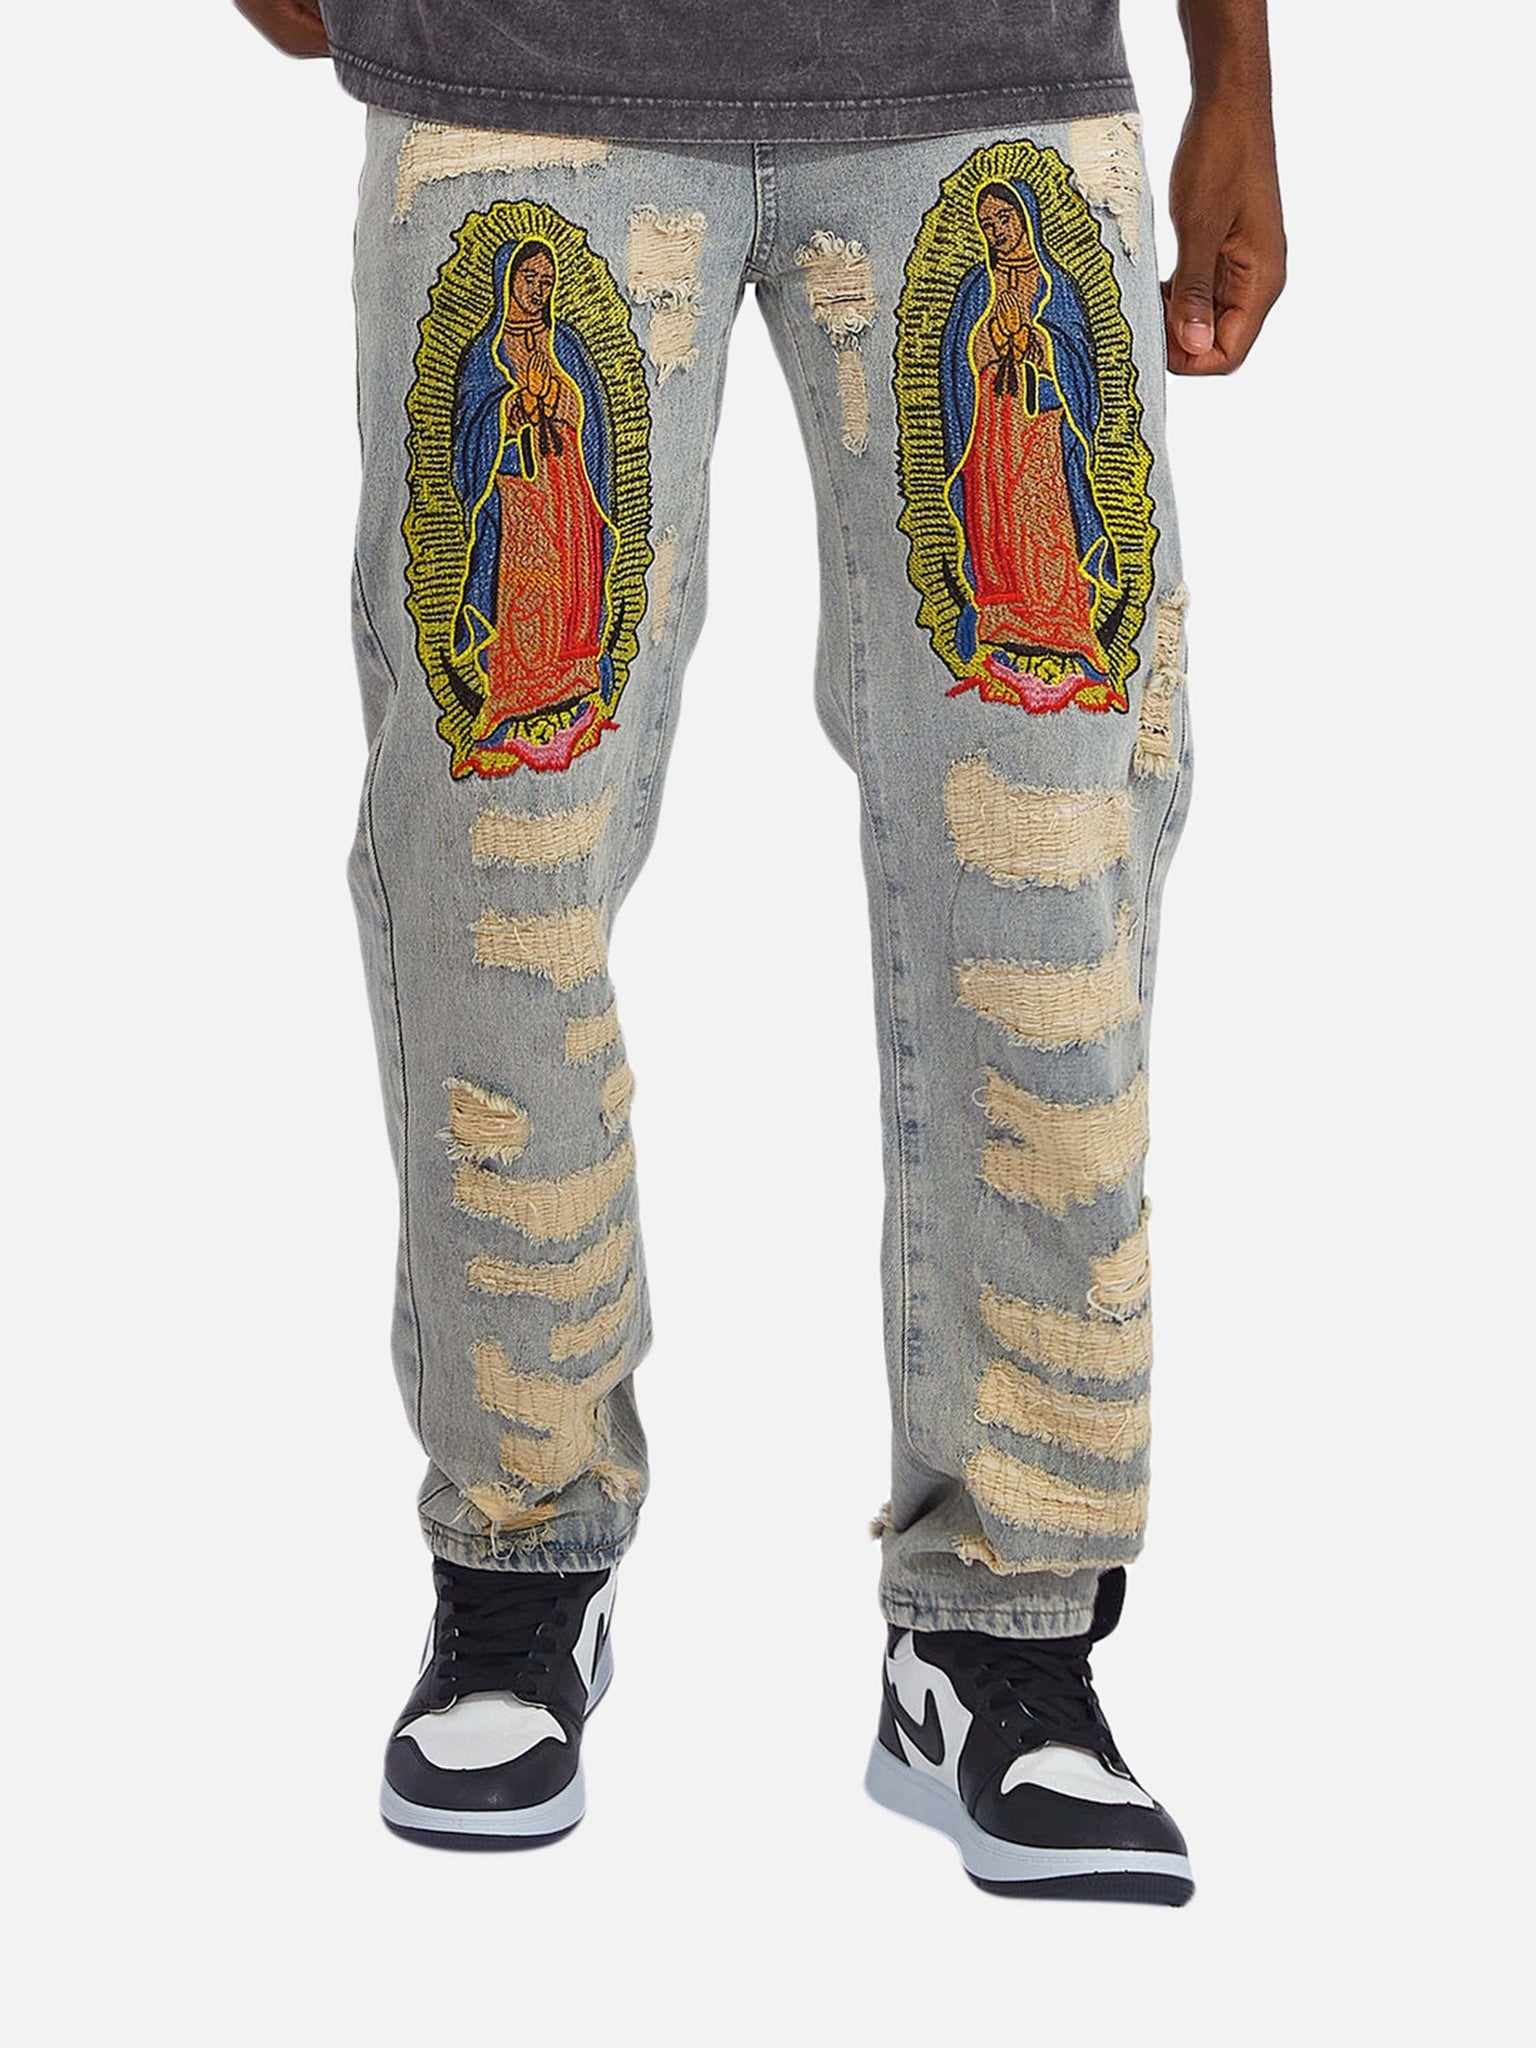 Thesupermade American Street Style Ripped Embroidered Jeans - 1617